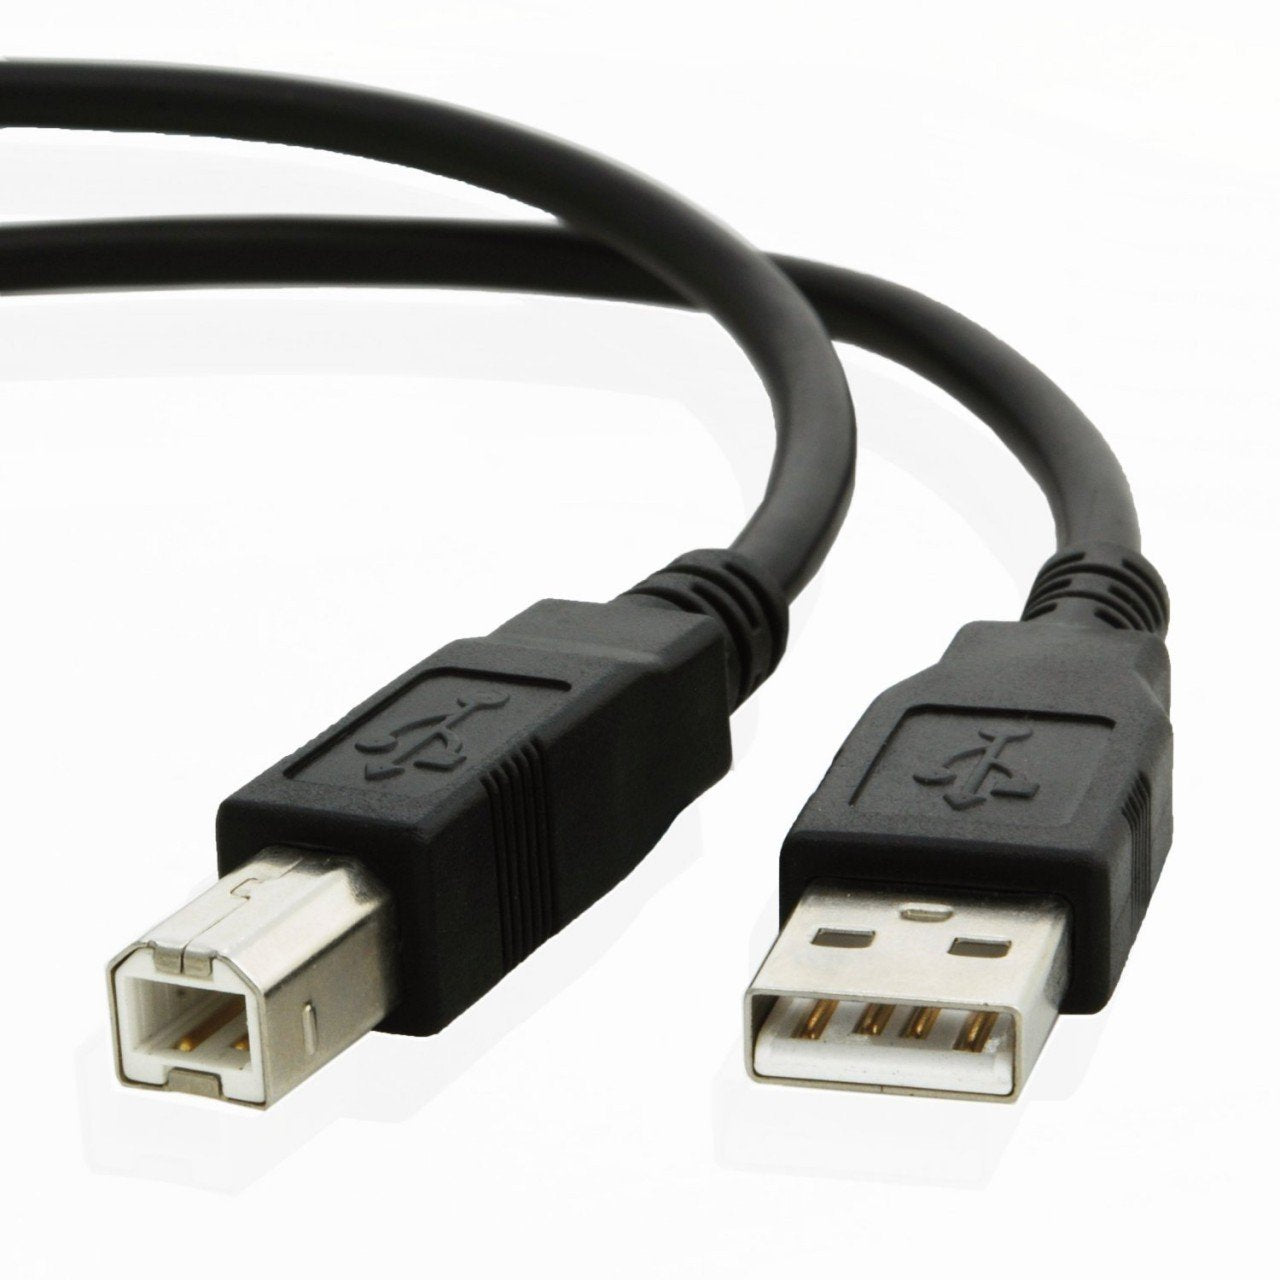 USB cable for Epson EXPRESSION XP-830